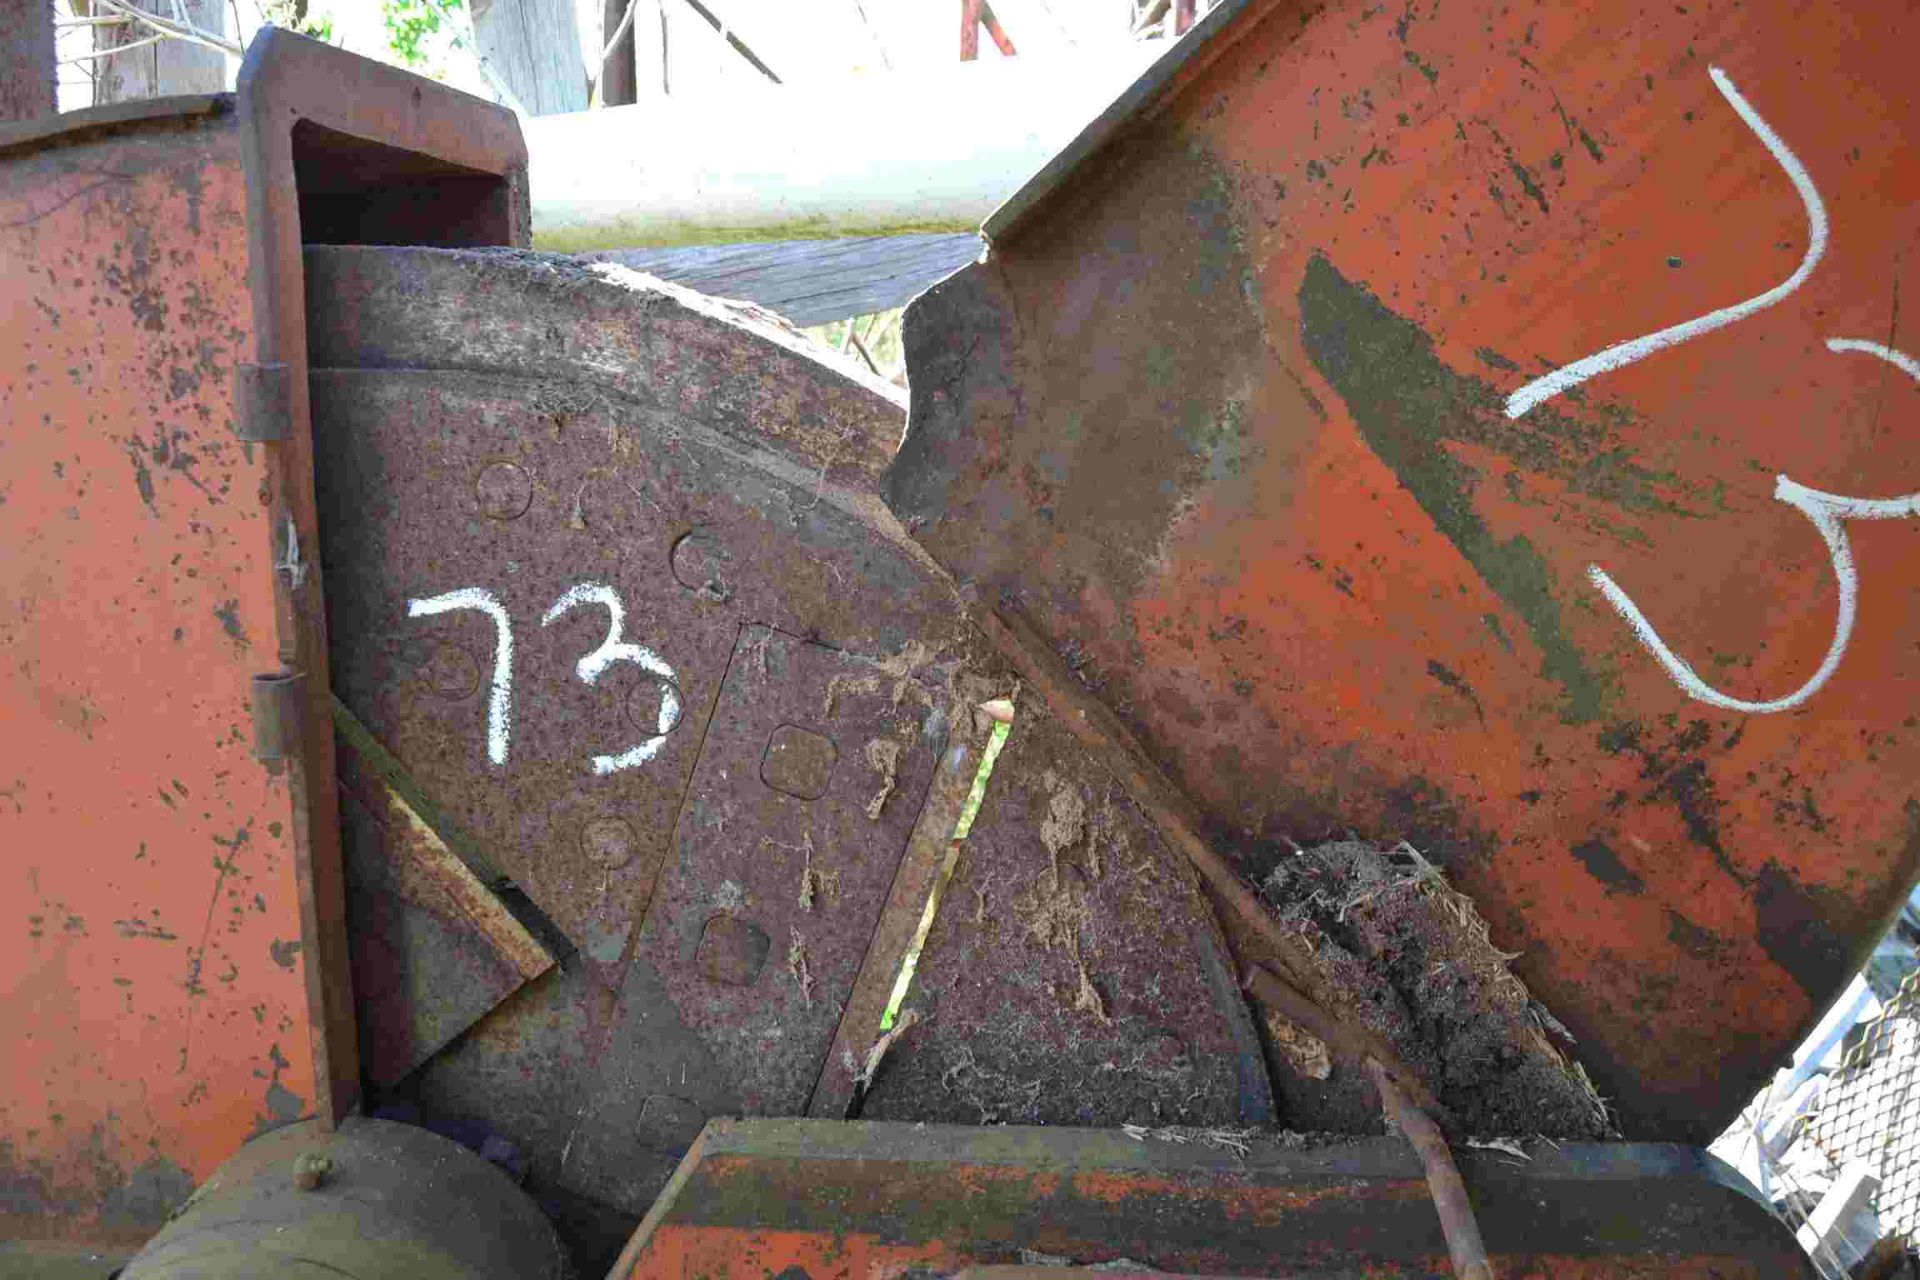 MORBARK 48" 6 KNIFE CHIPPER ON HORIZONTAL FEED TOP DISCHARGE NO MOTOR SN#0109 LOCATED SITE 2 - Image 3 of 4